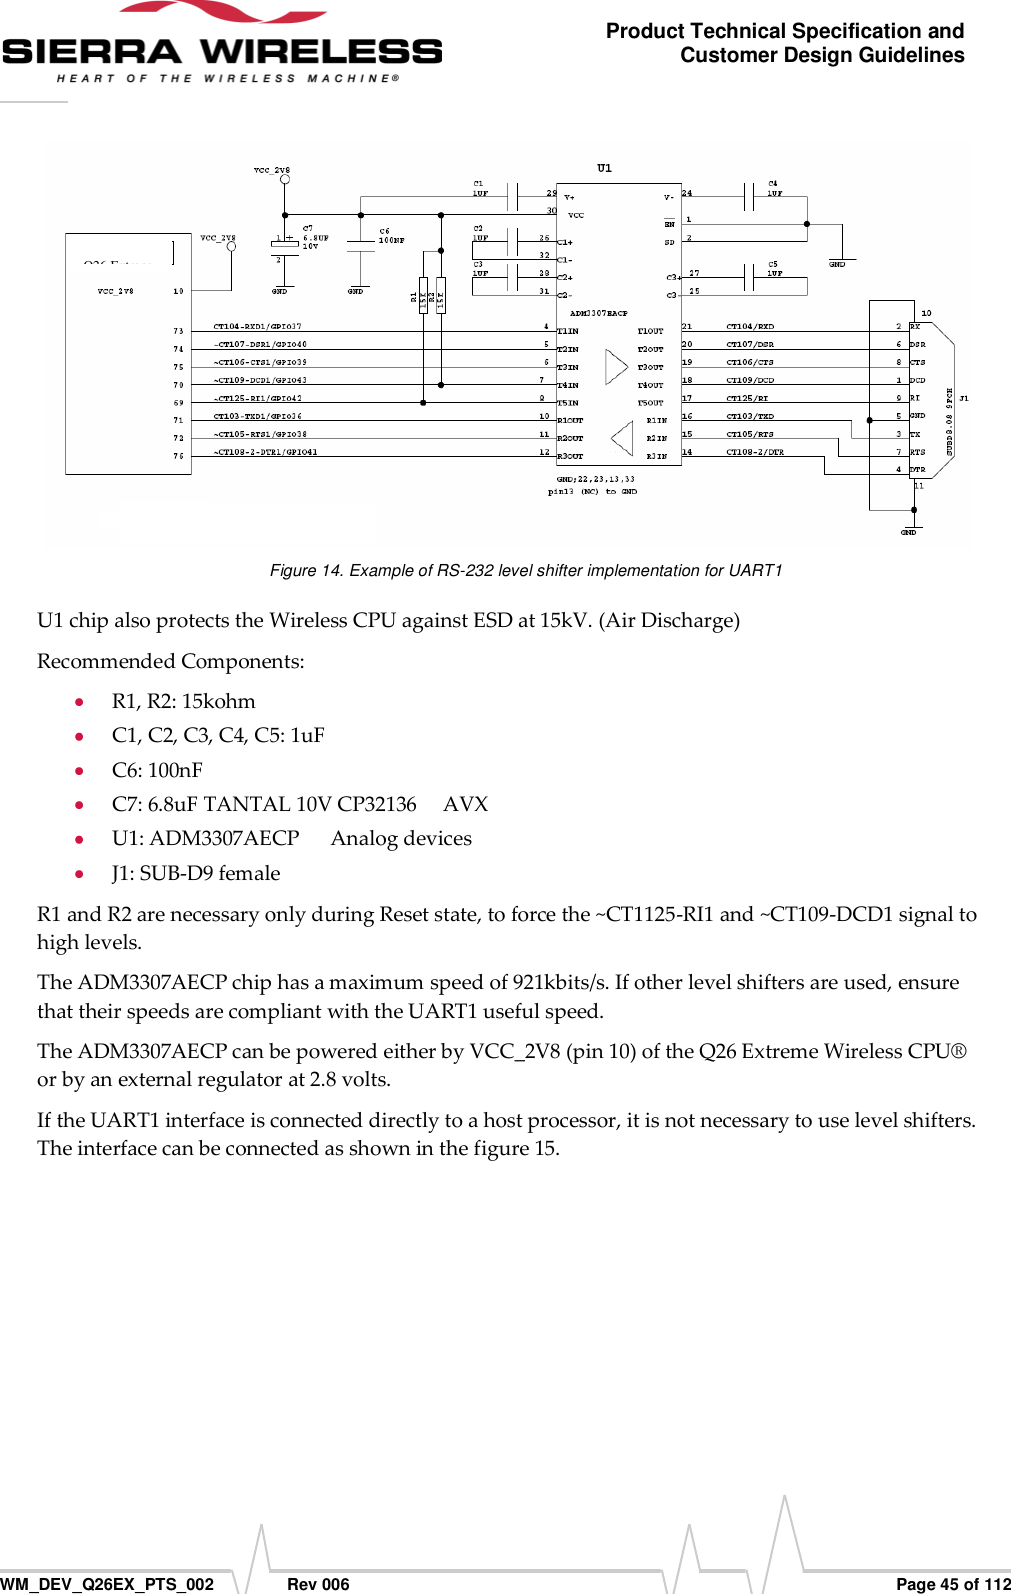      WM_DEV_Q26EX_PTS_002  Rev 006  Page 45 of 112 Product Technical Specification and Customer Design Guidelines  Figure 14. Example of RS-232 level shifter implementation for UART1 U1 chip also protects the Wireless CPU against ESD at 15kV. (Air Discharge) Recommended Components:  R1, R2: 15kohm  C1, C2, C3, C4, C5: 1uF  C6: 100nF  C7: 6.8uF TANTAL 10V CP32136     AVX  U1: ADM3307AECP      Analog devices  J1: SUB-D9 female  R1 and R2 are necessary only during Reset state, to force the ~CT1125-RI1 and ~CT109-DCD1 signal to high levels. The ADM3307AECP chip has a maximum speed of 921kbits/s. If other level shifters are used, ensure that their speeds are compliant with the UART1 useful speed. The ADM3307AECP can be powered either by VCC_2V8 (pin 10) of the Q26 Extreme Wireless CPU® or by an external regulator at 2.8 volts. If the UART1 interface is connected directly to a host processor, it is not necessary to use level shifters. The interface can be connected as shown in the figure 15. Q26 Extrene                                